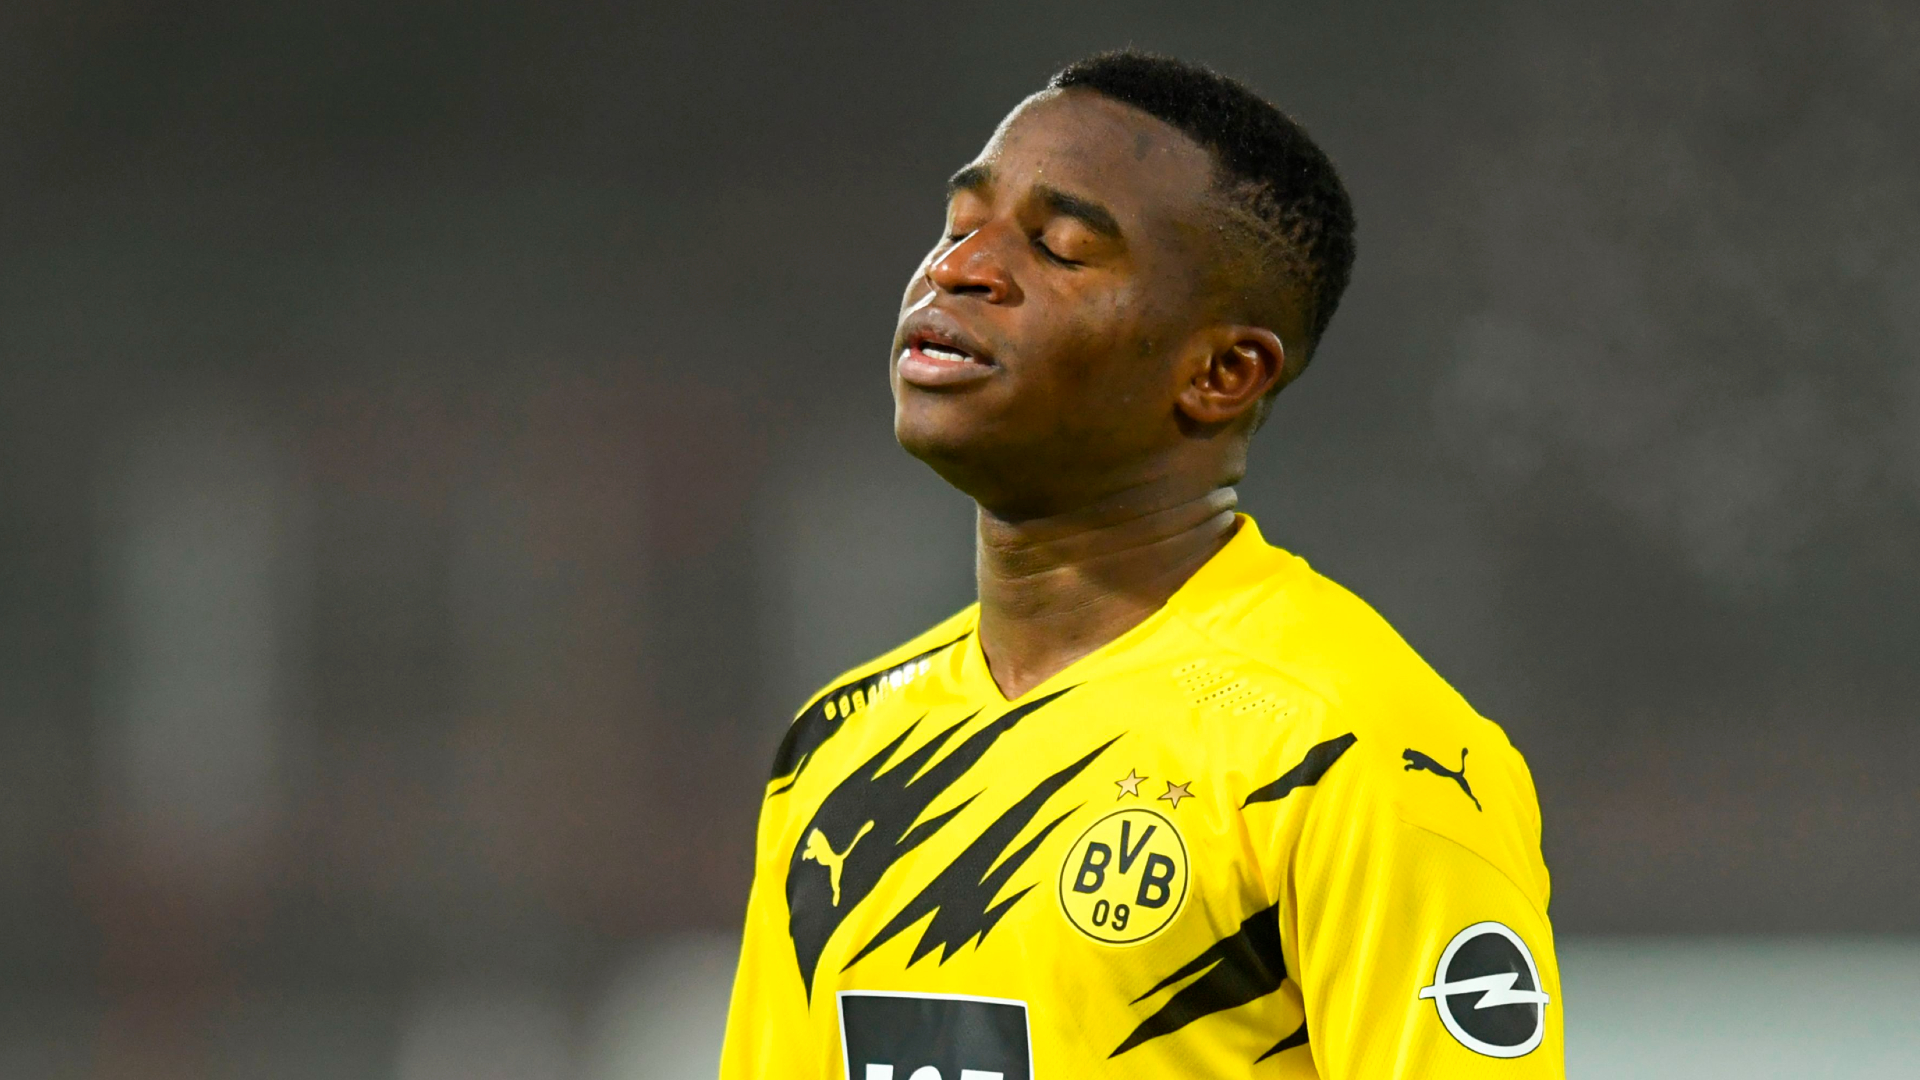 ‘The reports were very stressful’ – Borussia Dortmund wonderkid Moukoko reveals he wanted to quit football